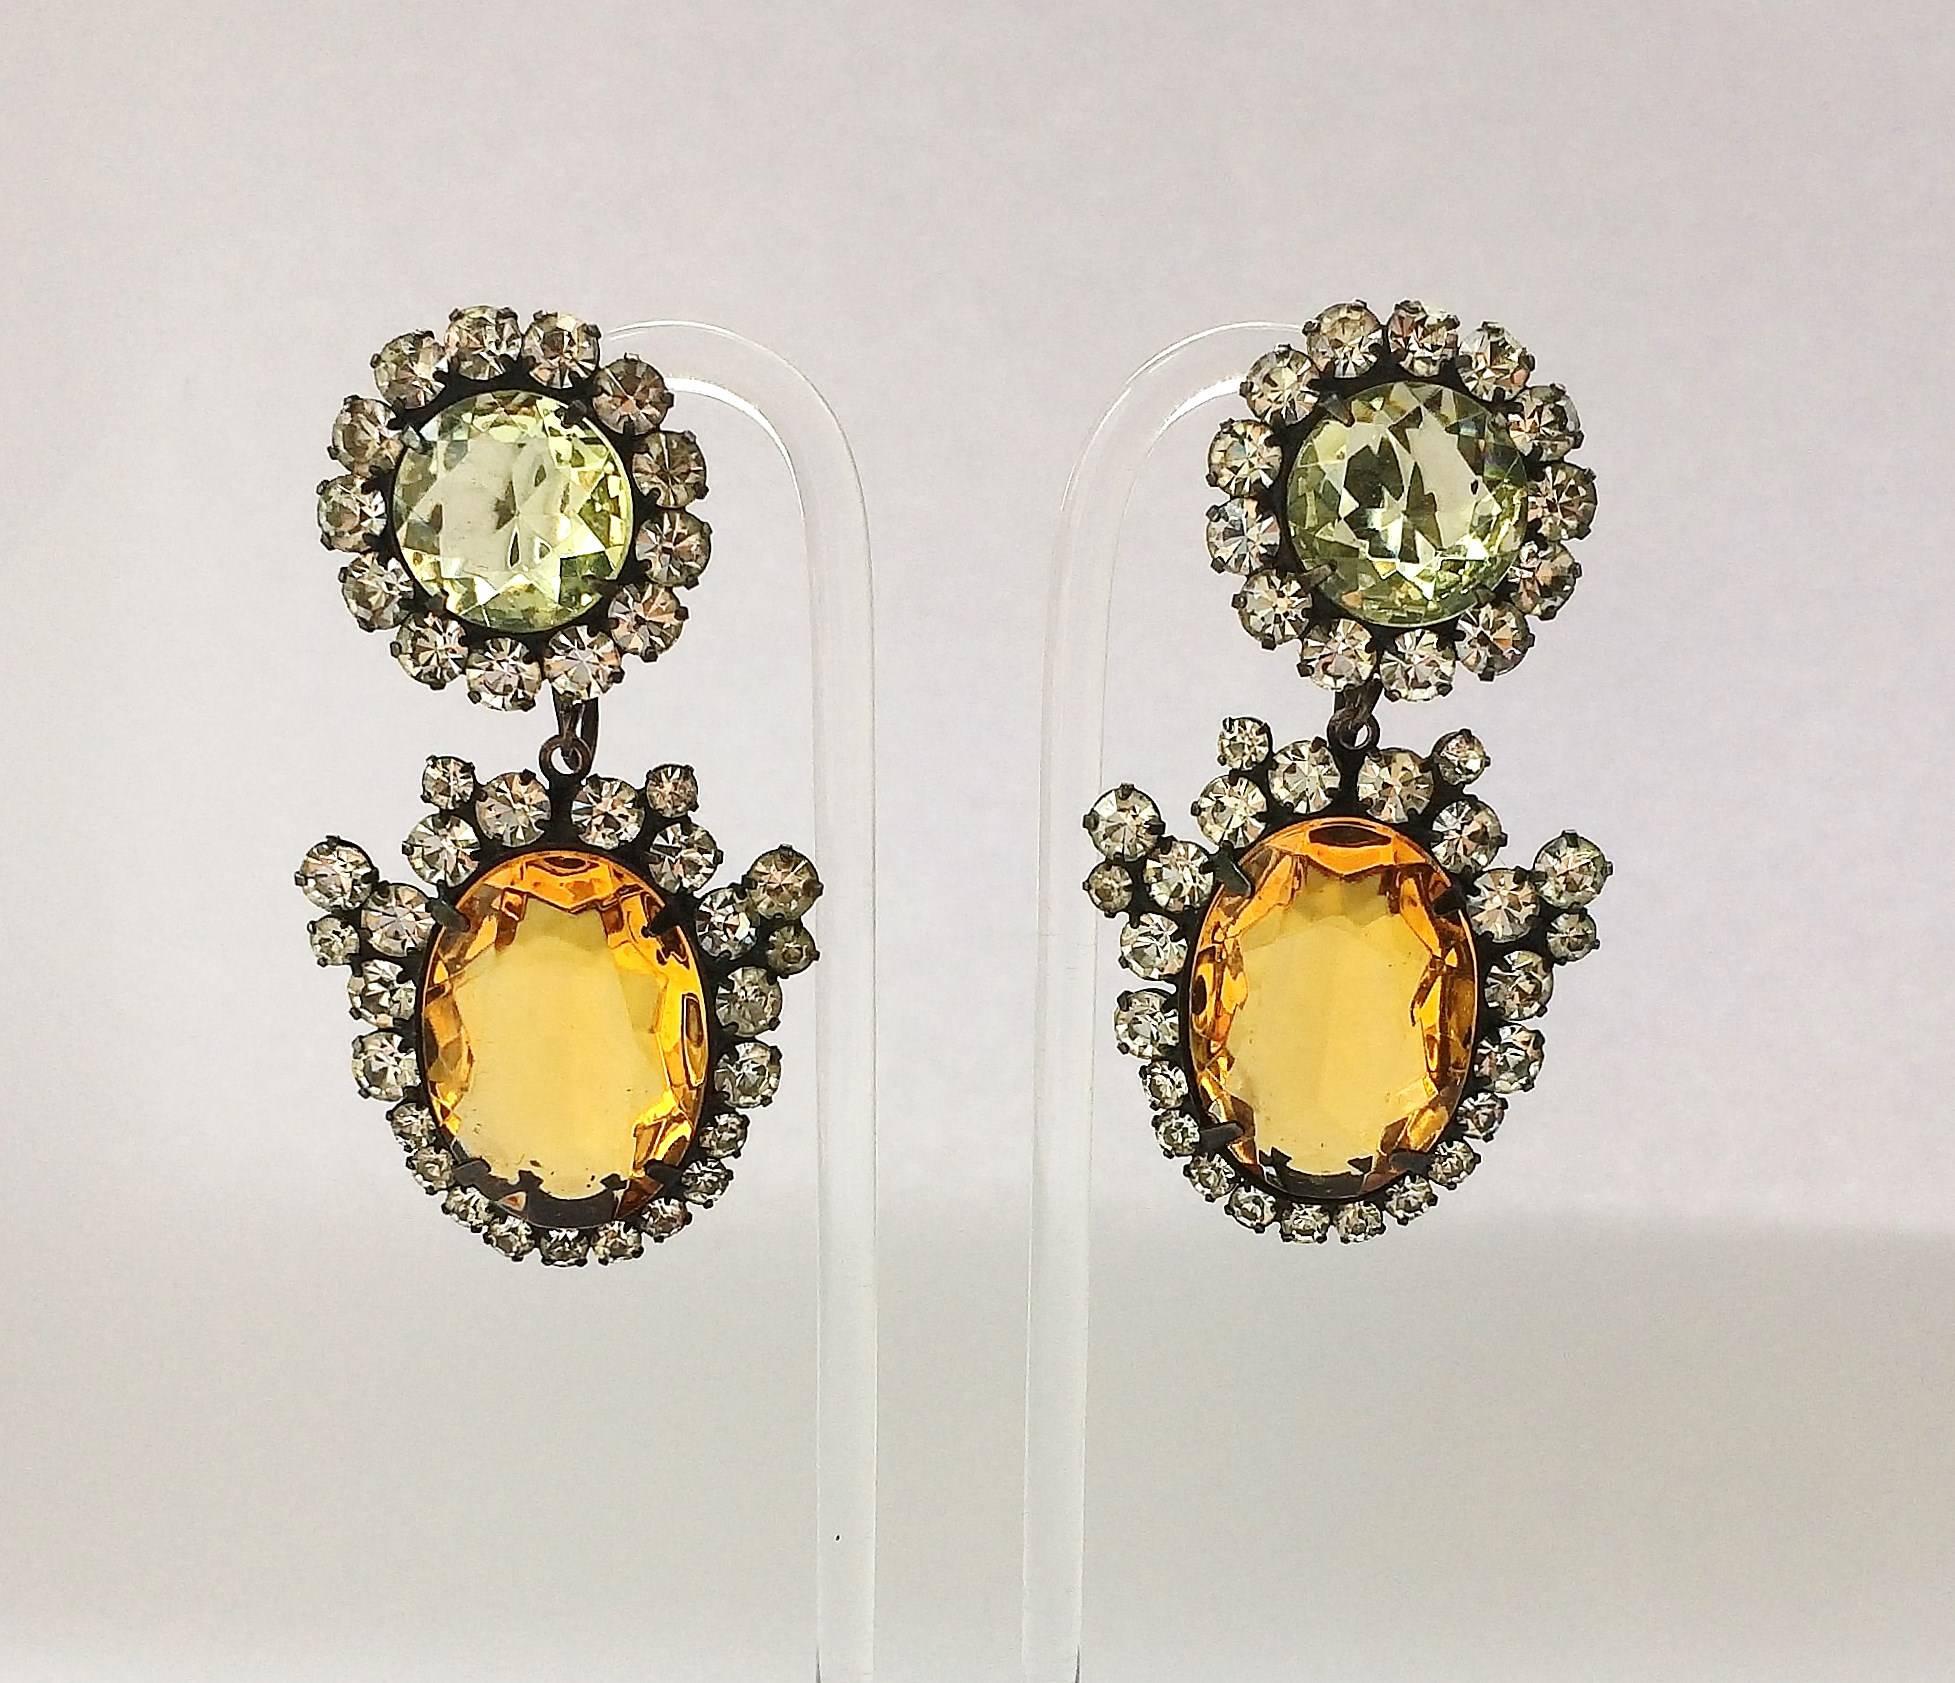 Elegant drop earrings by Kenneth Jay Lane, in subtle colours of citrine and topaz, surrounded by clear paste. Again, as with many of KJL design's from the this period, they have a highly glamorous, more antique look, and are very wearable for many